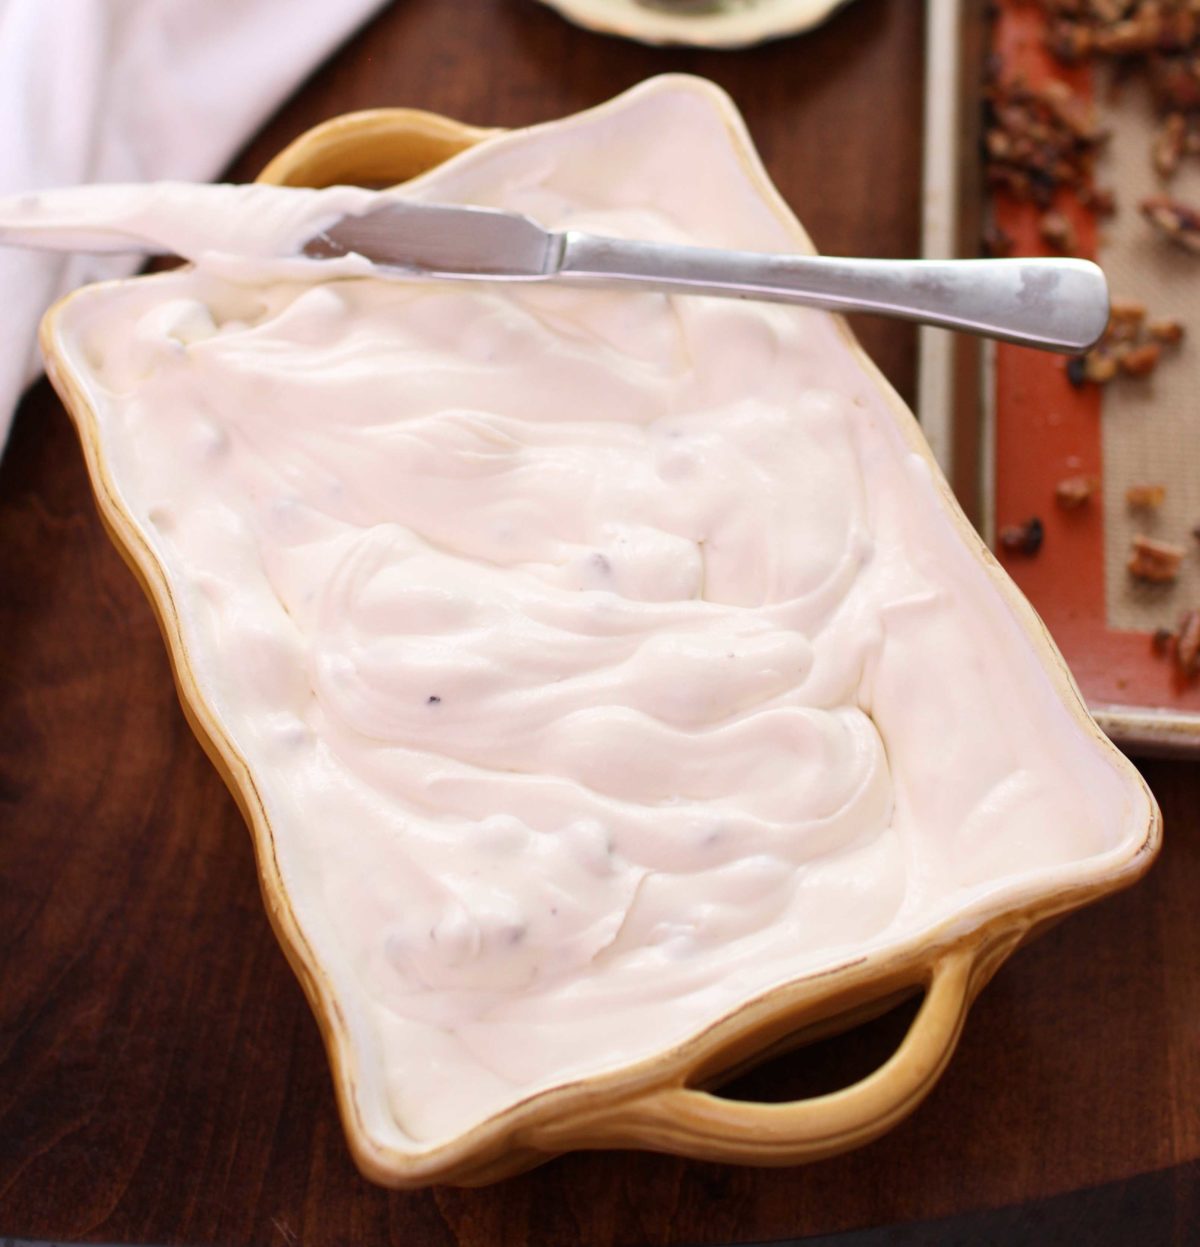 butter pecan ice cream in a yellow long baking dish with a knife resting on the side of the dish.